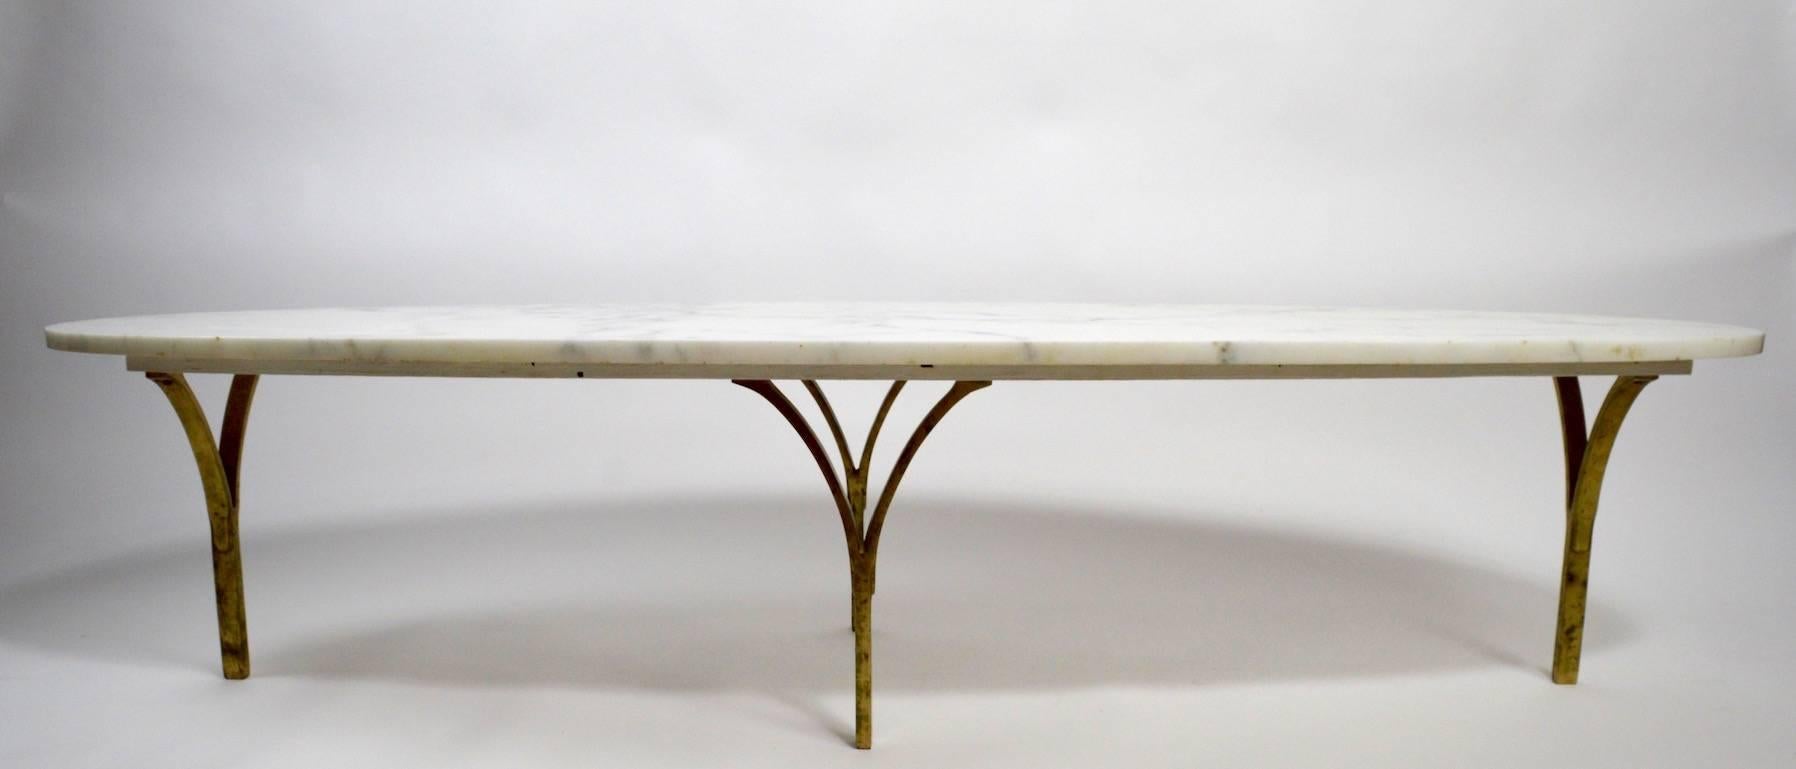 marble table with brass legs